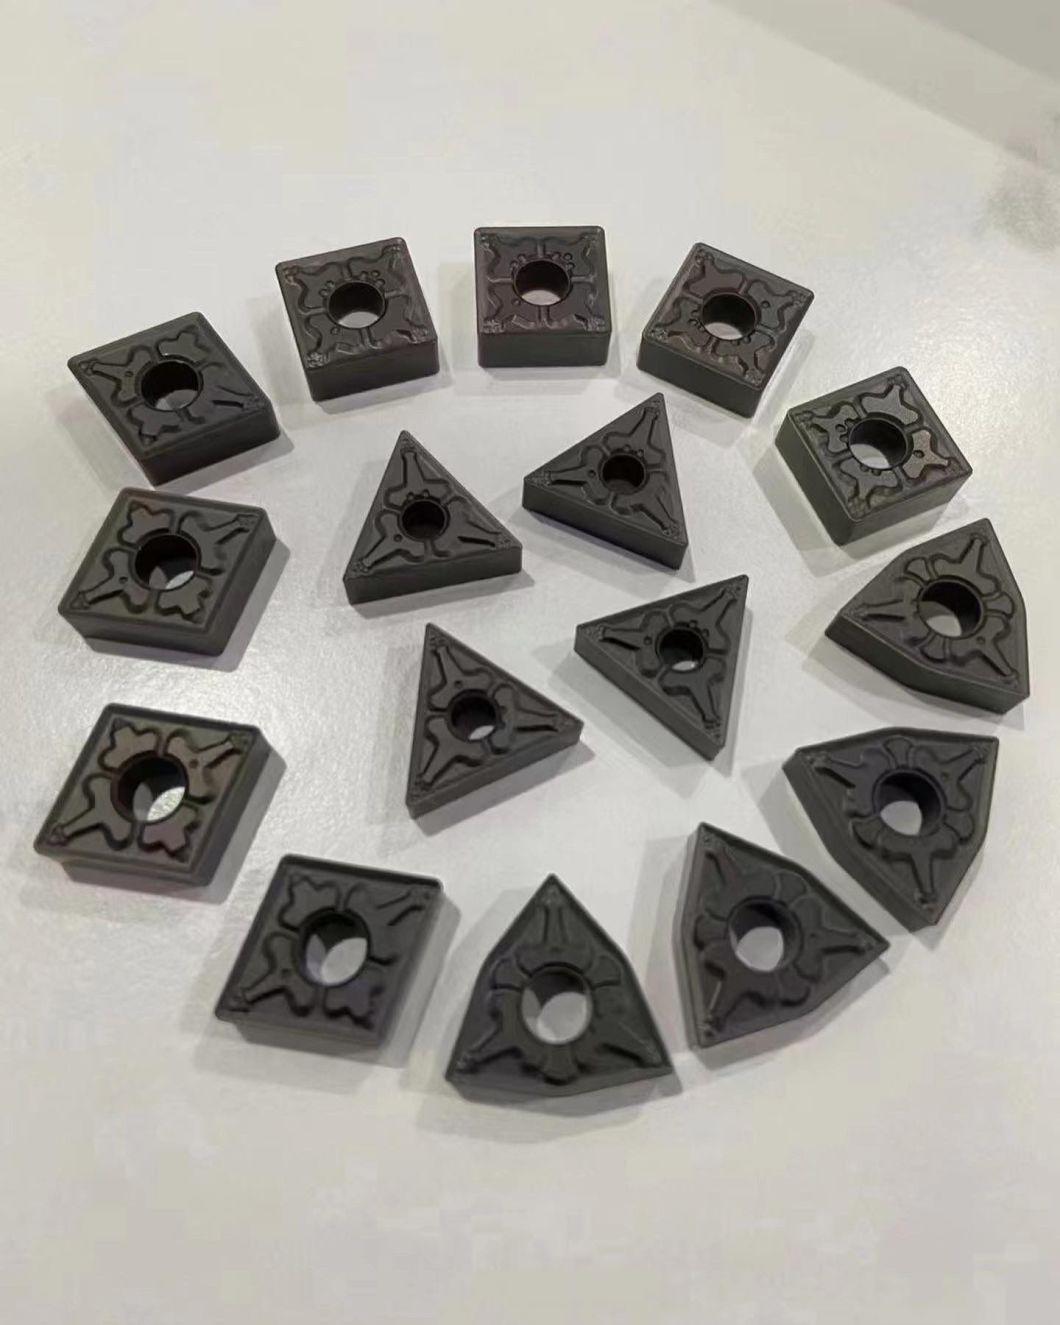 Tungsten Carbide CNC High Feed Turning Thread Milling Inserts Cnmg120404